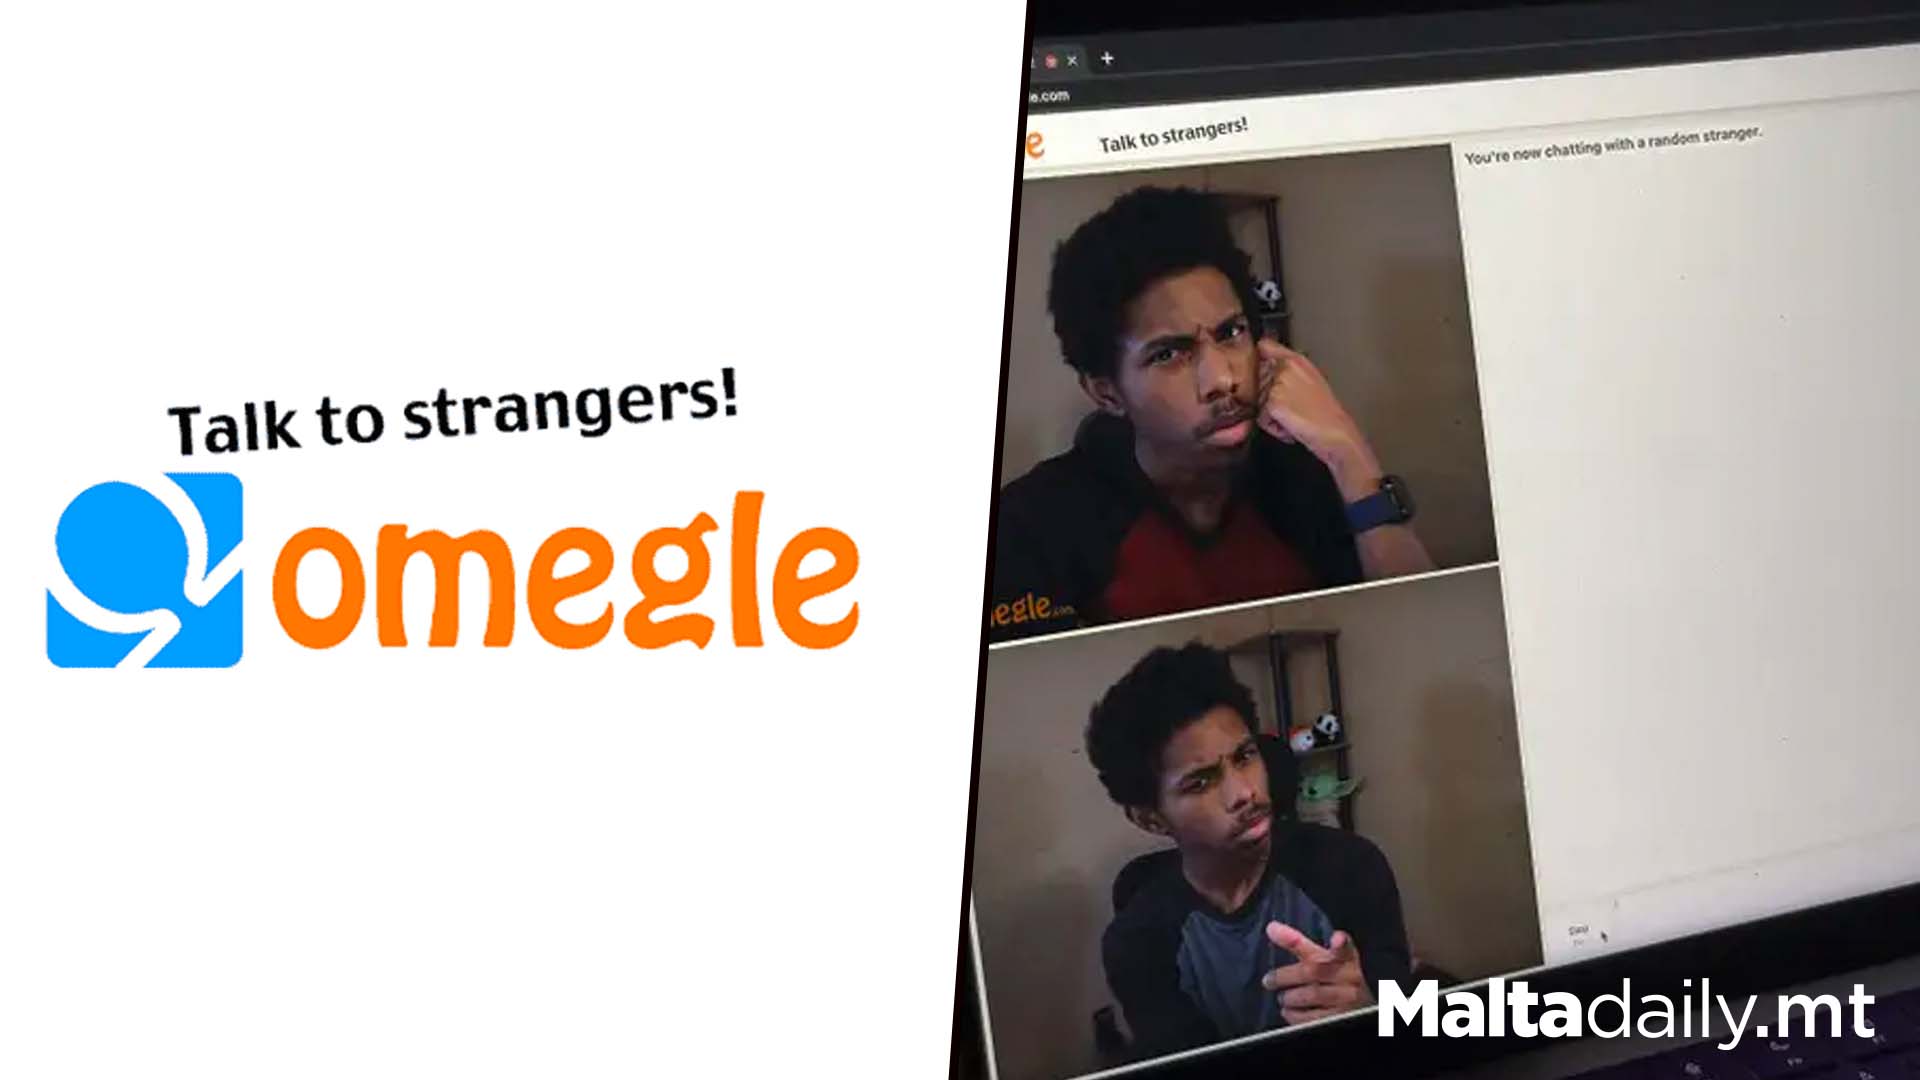 Omegle Officially Shuts Down After 14 Years